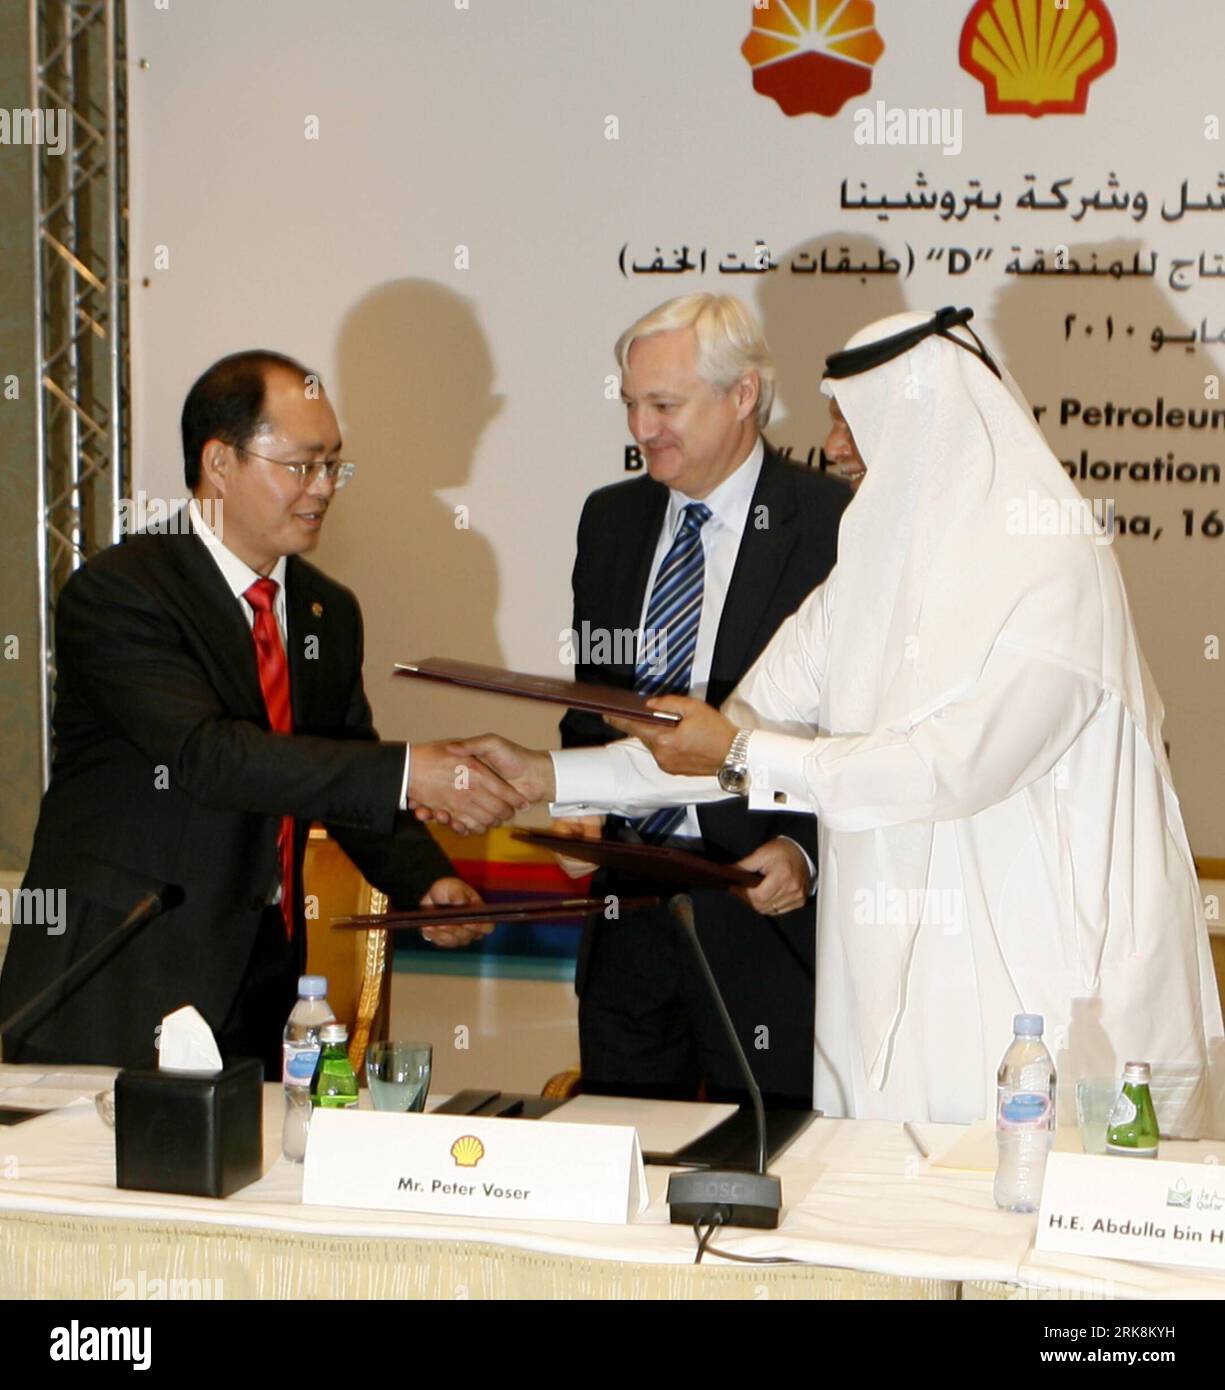 Bildnummer: 54052731  Datum: 16.05.2010  Copyright: imago/Xinhua (100517) -- QATAR, May 17, 2010 (Xinhua) -- Zhao Dong (L), CFO of PetroChina International Investment, exchanges the agreement documents with Abdulla Bin Hamad Al-Attiyah (R), deputy premier and minister of Energy and Industry of Qatar, while Peter Voser (C), CEO of Royal Dutch Shell Plc, looks on during the signing of The Exploration and Production Sharing Agreement (EPSA) in Doha, May 16, 2010. The EPSA is signed Sunday between Qatar Petroleum (QP) and joint partners Shell and China National Petroleum Corporation (CNPC) for the Stock Photo